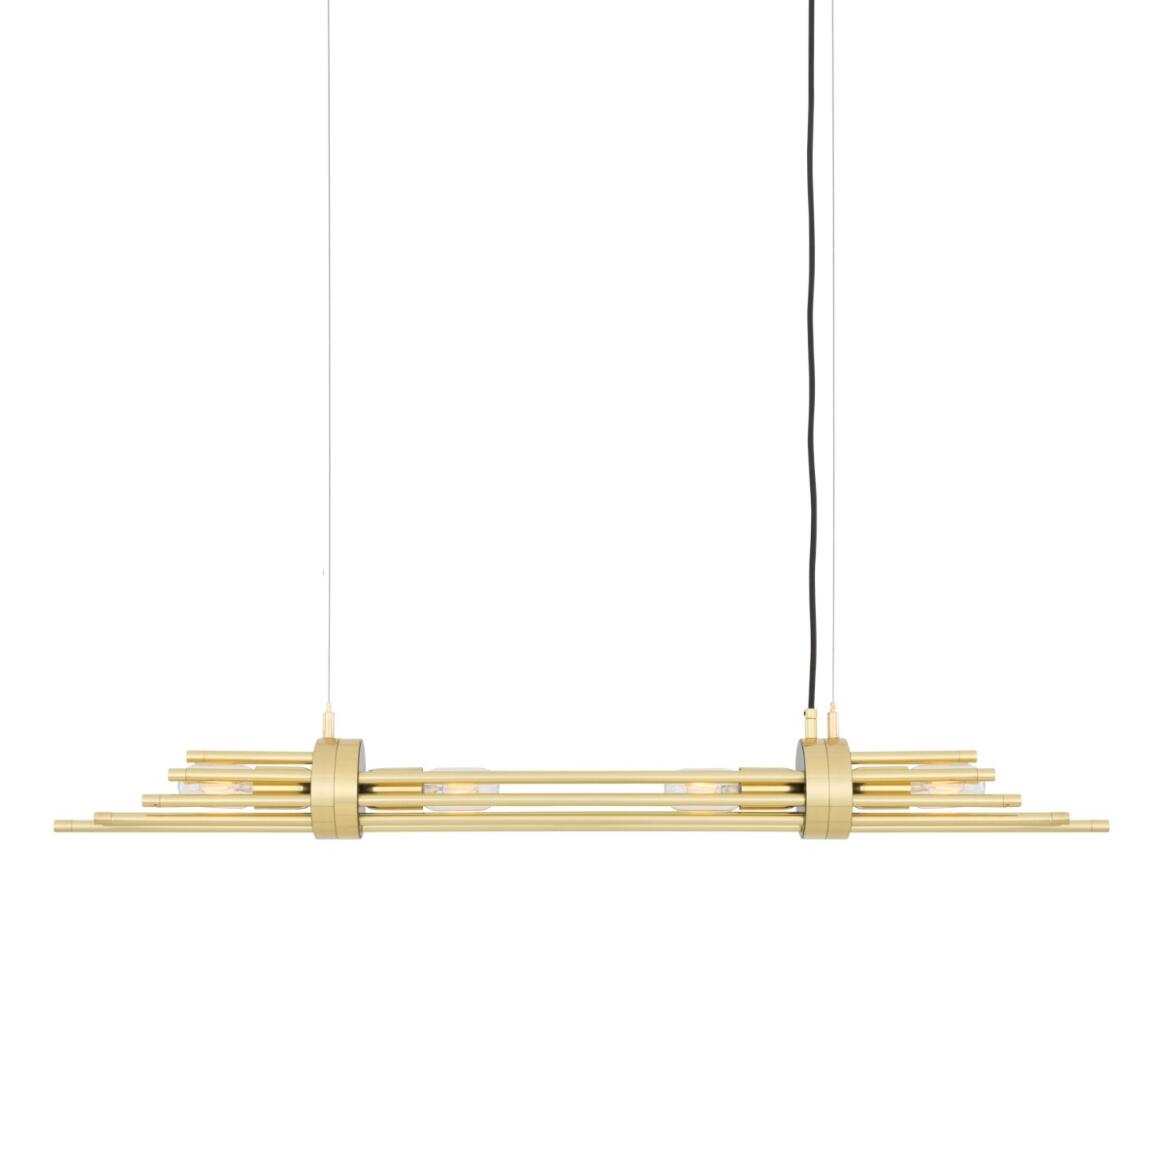 Victoria Modern Brass Chandelier, Four Light main product image